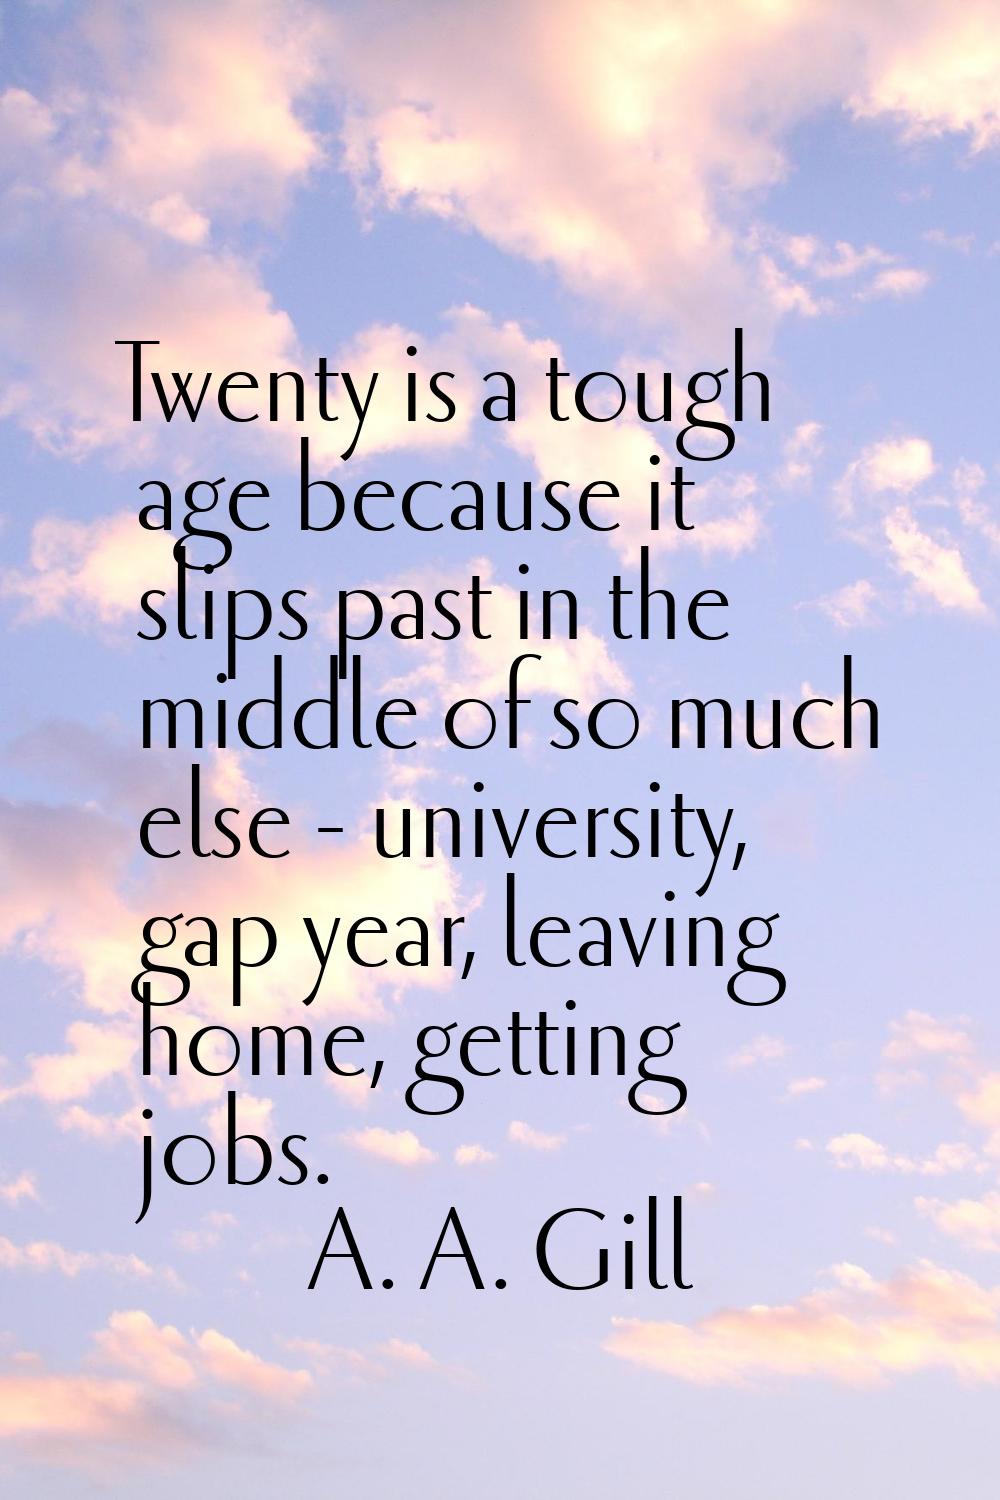 Twenty is a tough age because it slips past in the middle of so much else - university, gap year, l